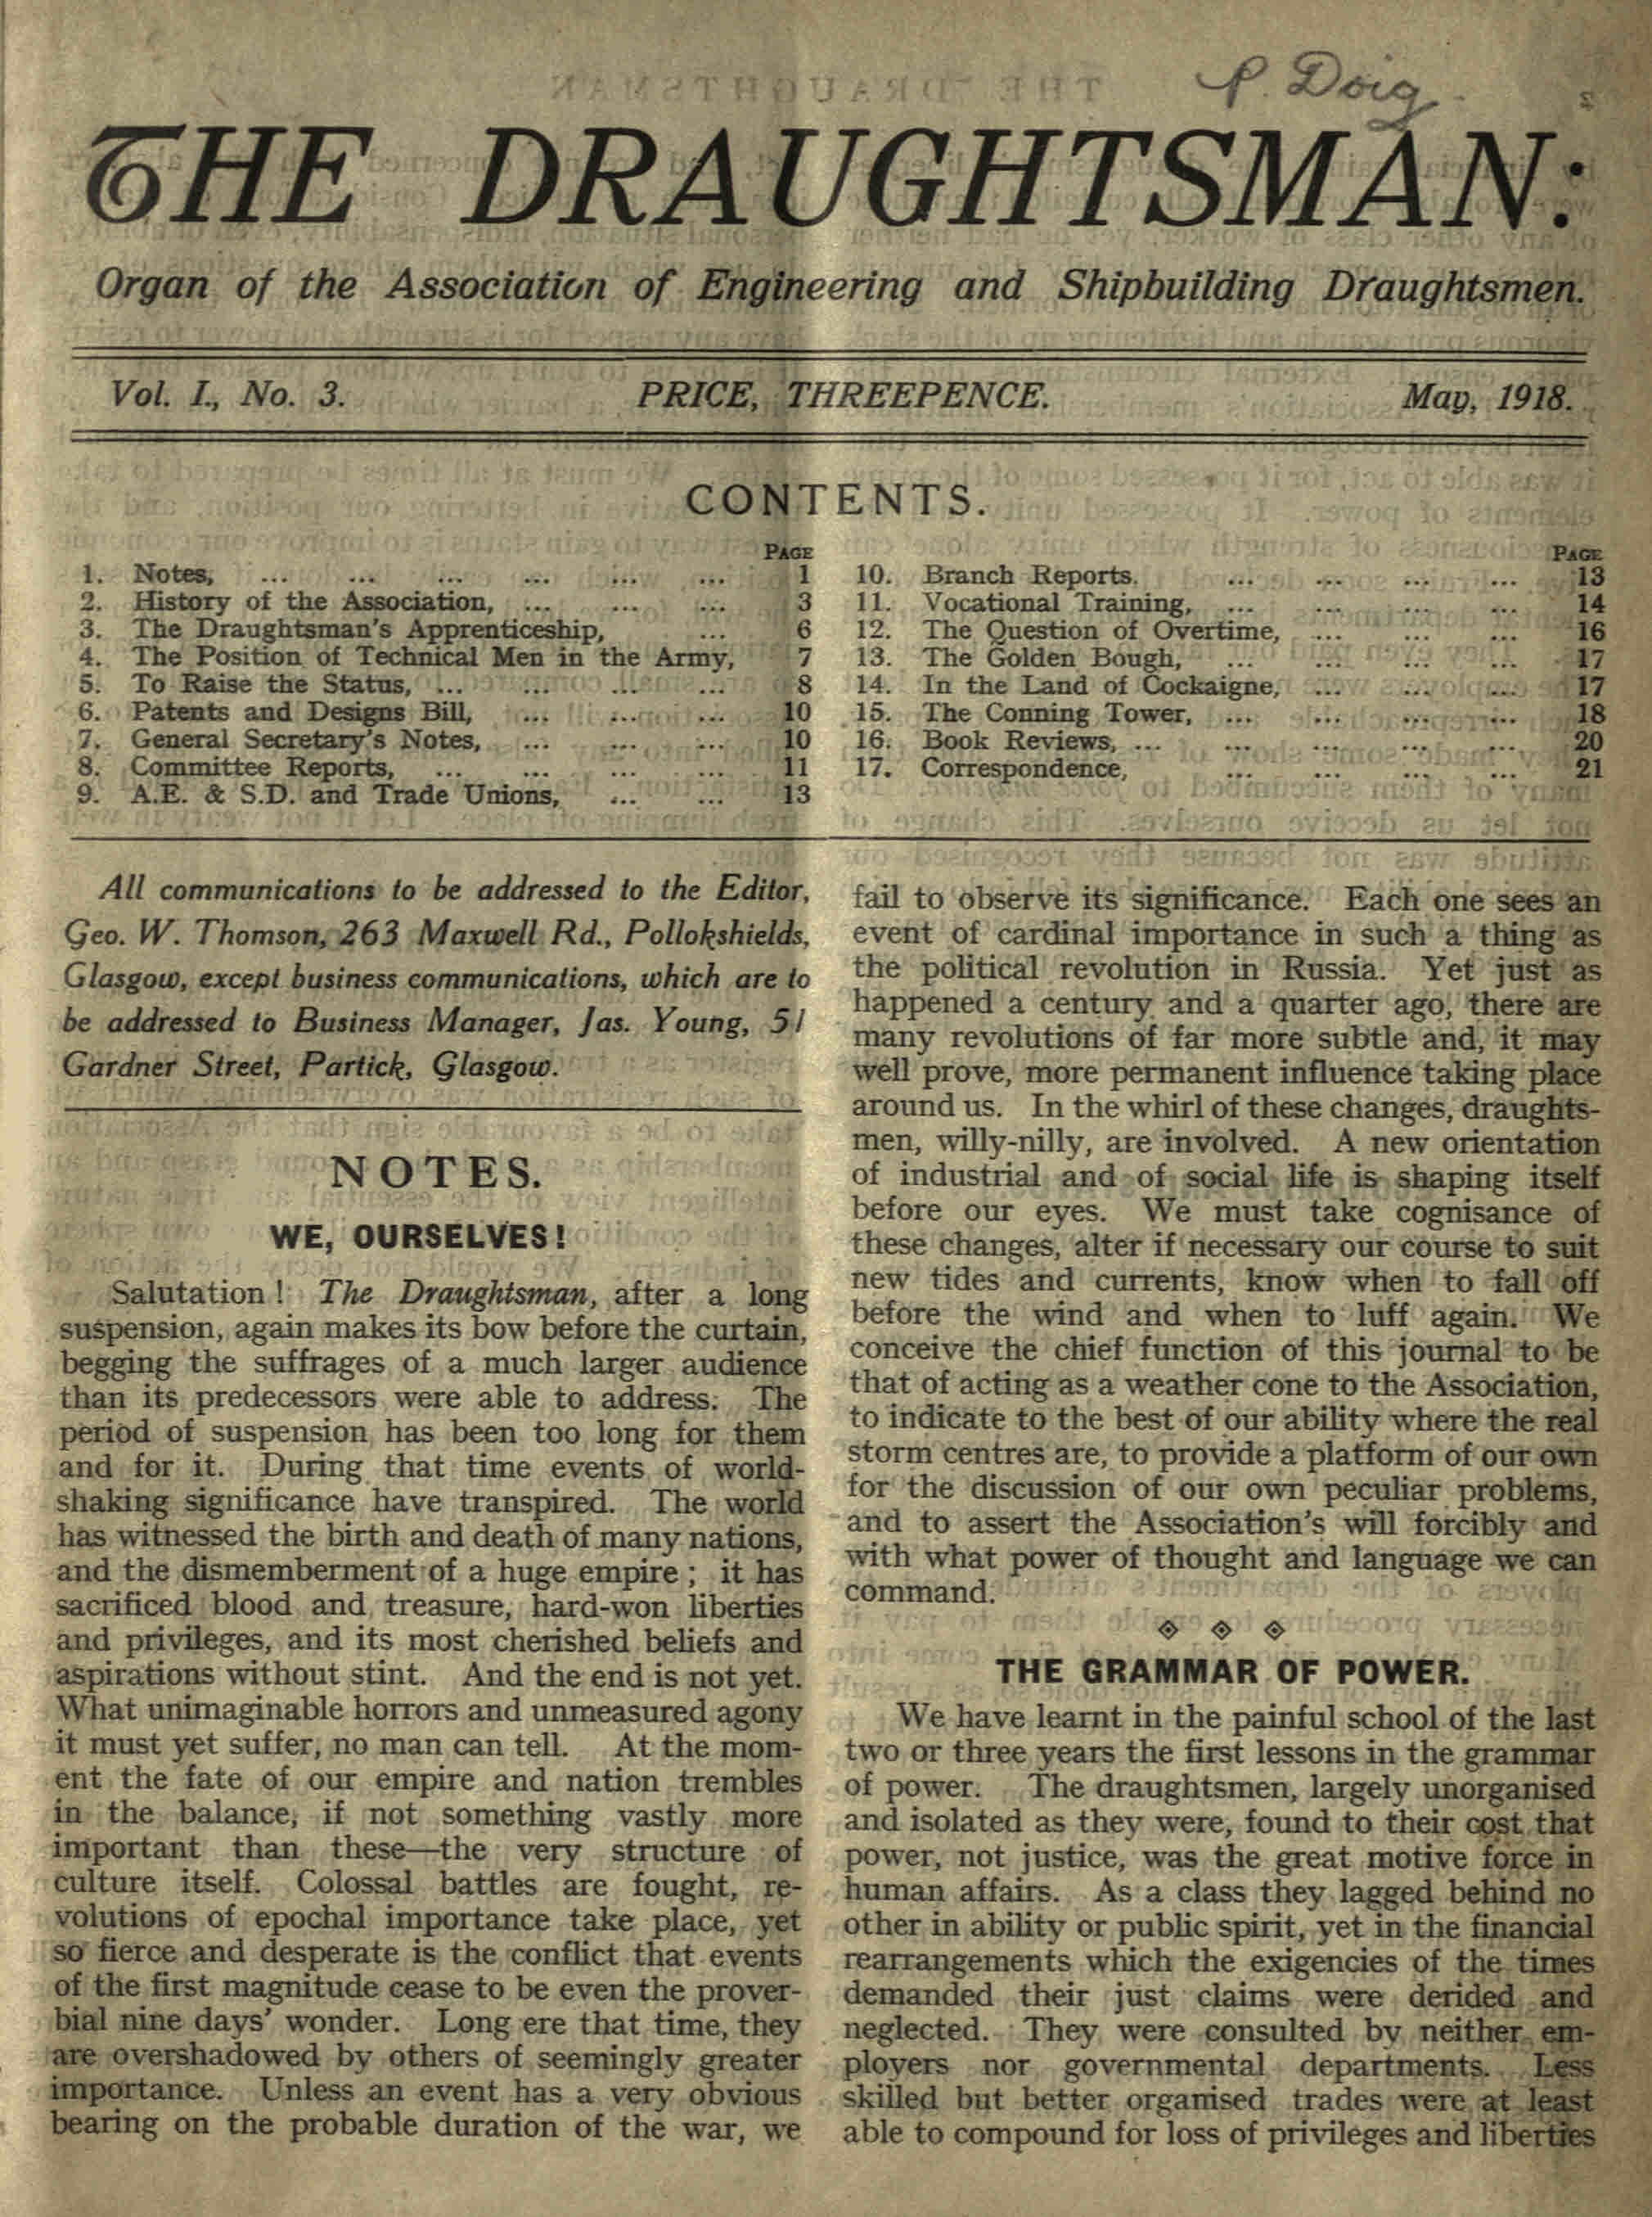 Front page of The Draughtsman, May 1918